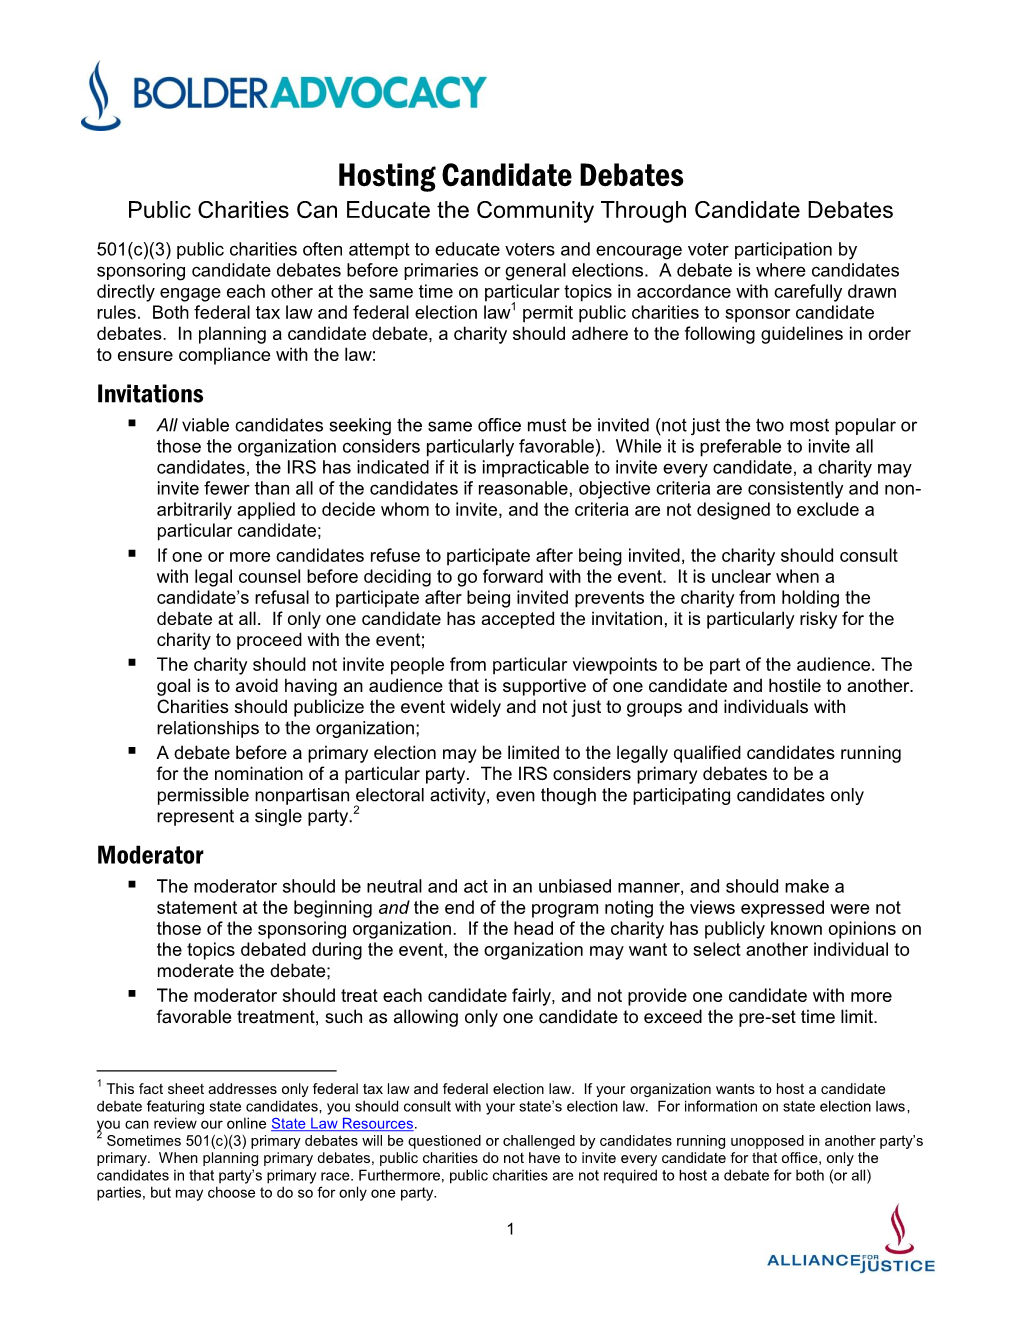 Hosting Candidate Debates Public Charities Can Educate the Community Through Candidate Debates